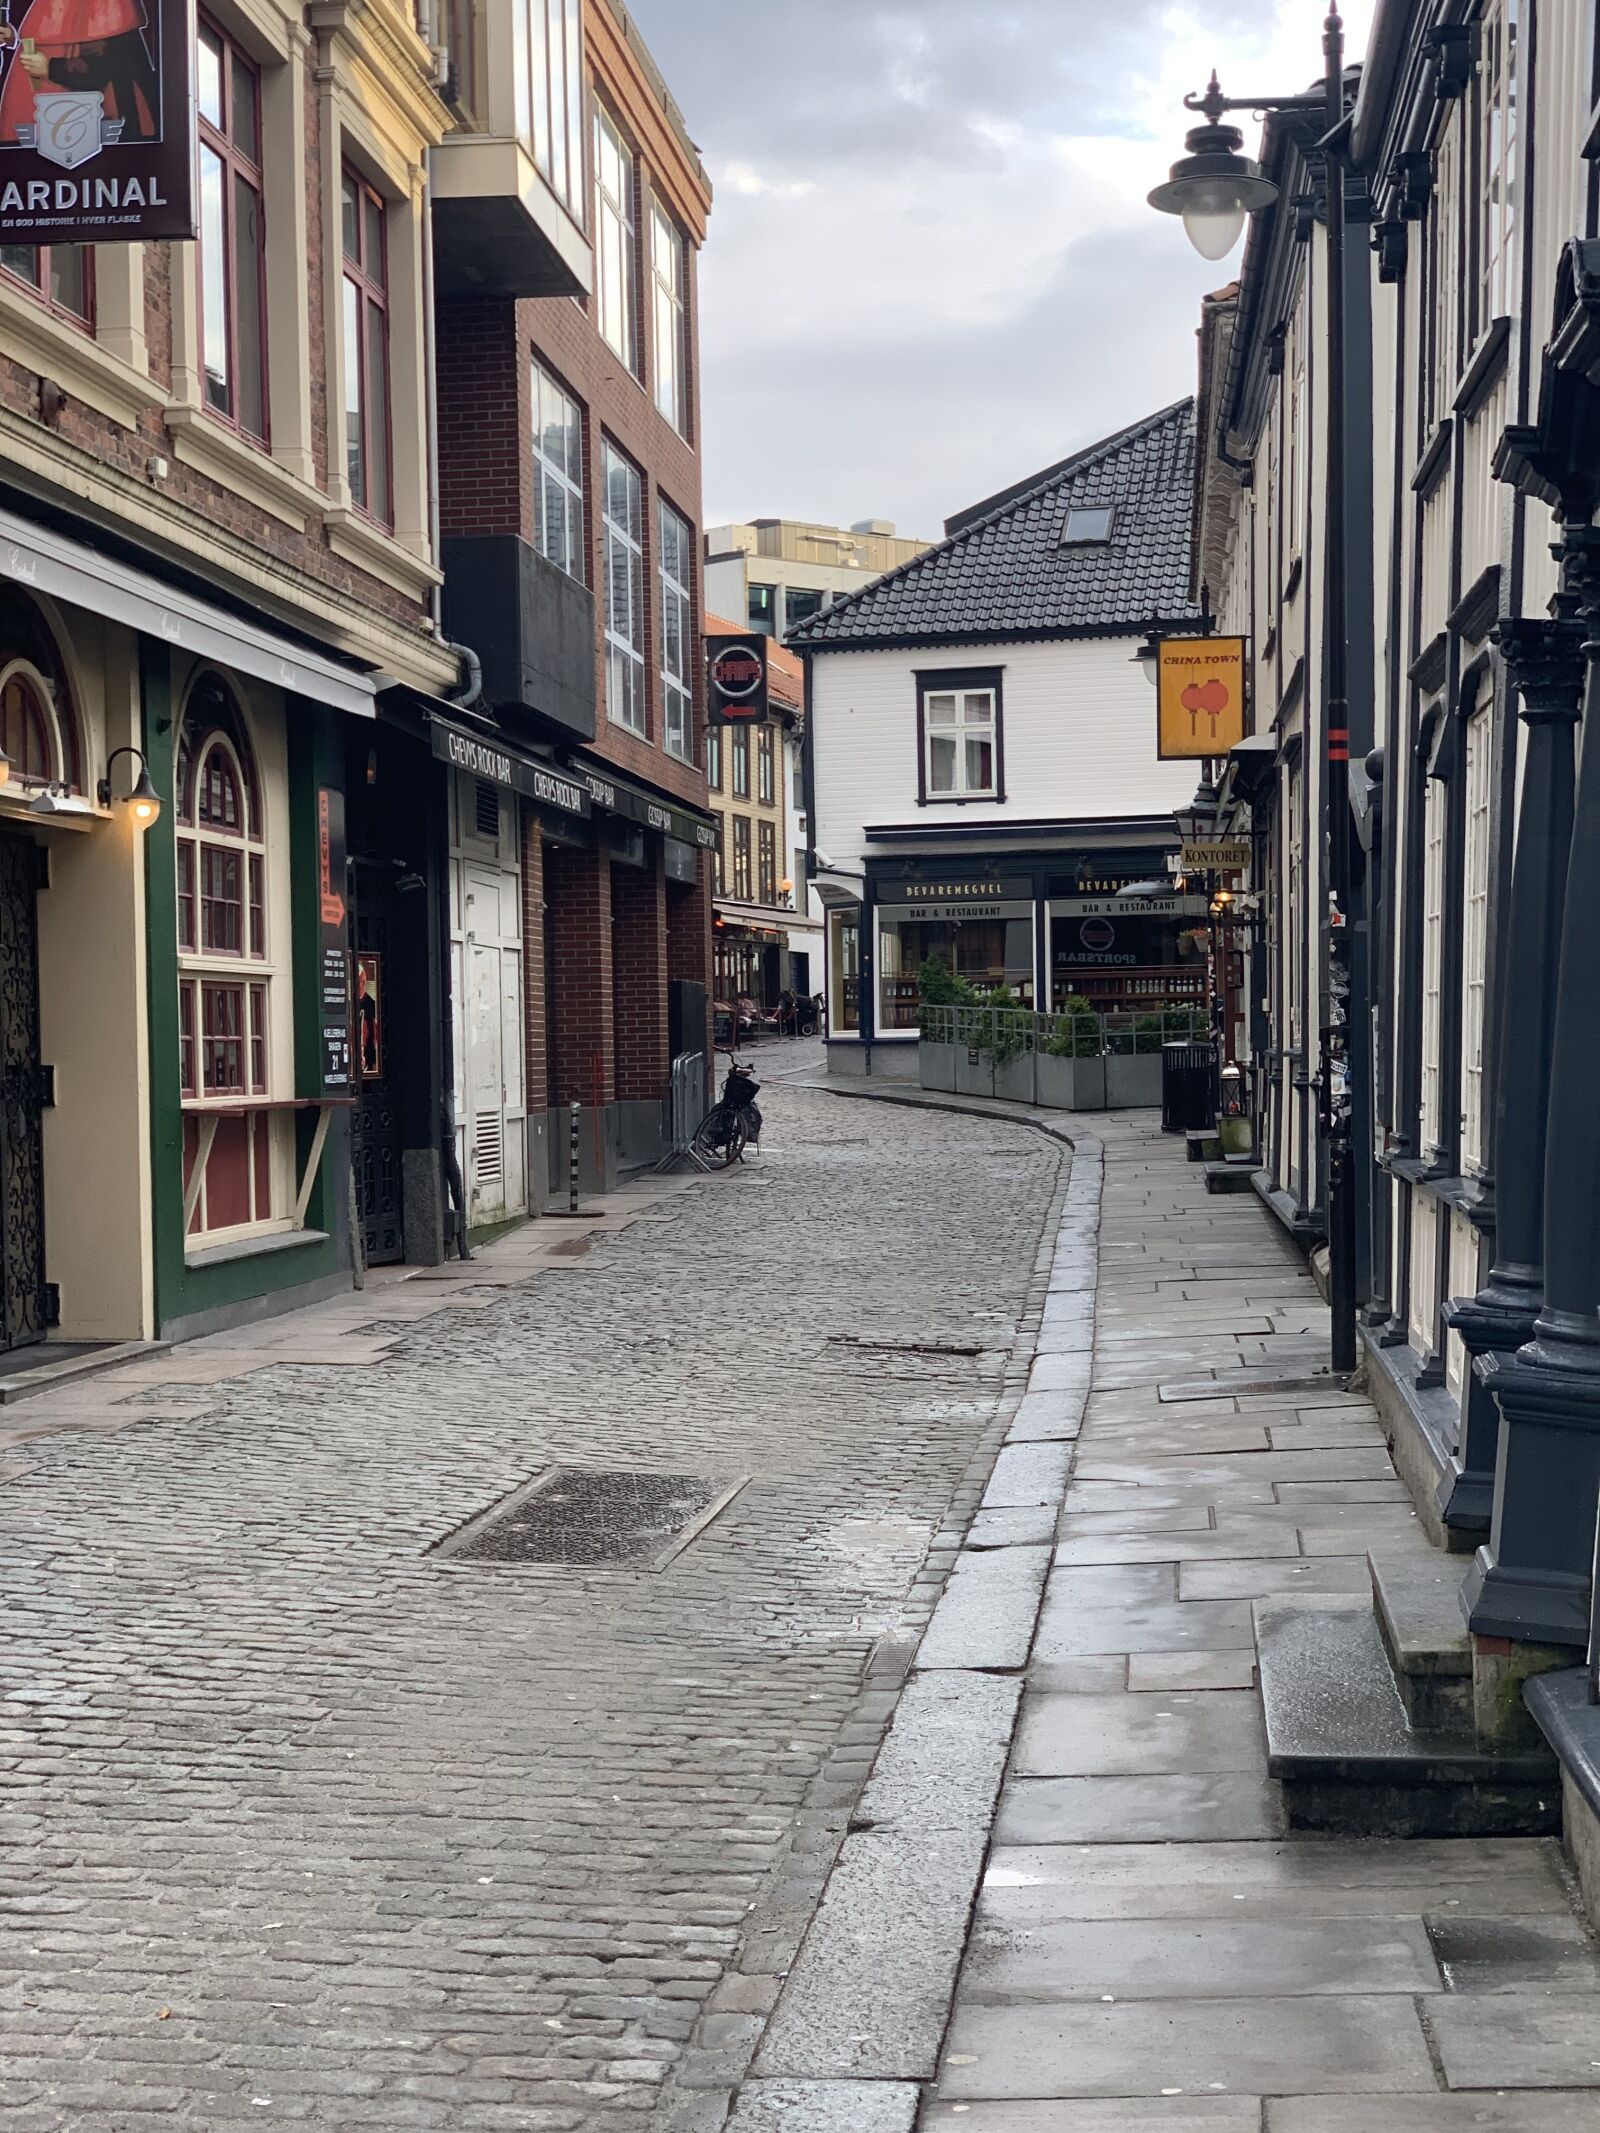 iPhone XS back dual camera 6mm f/2.4 sample photo. Old stavanger, old shopping photography